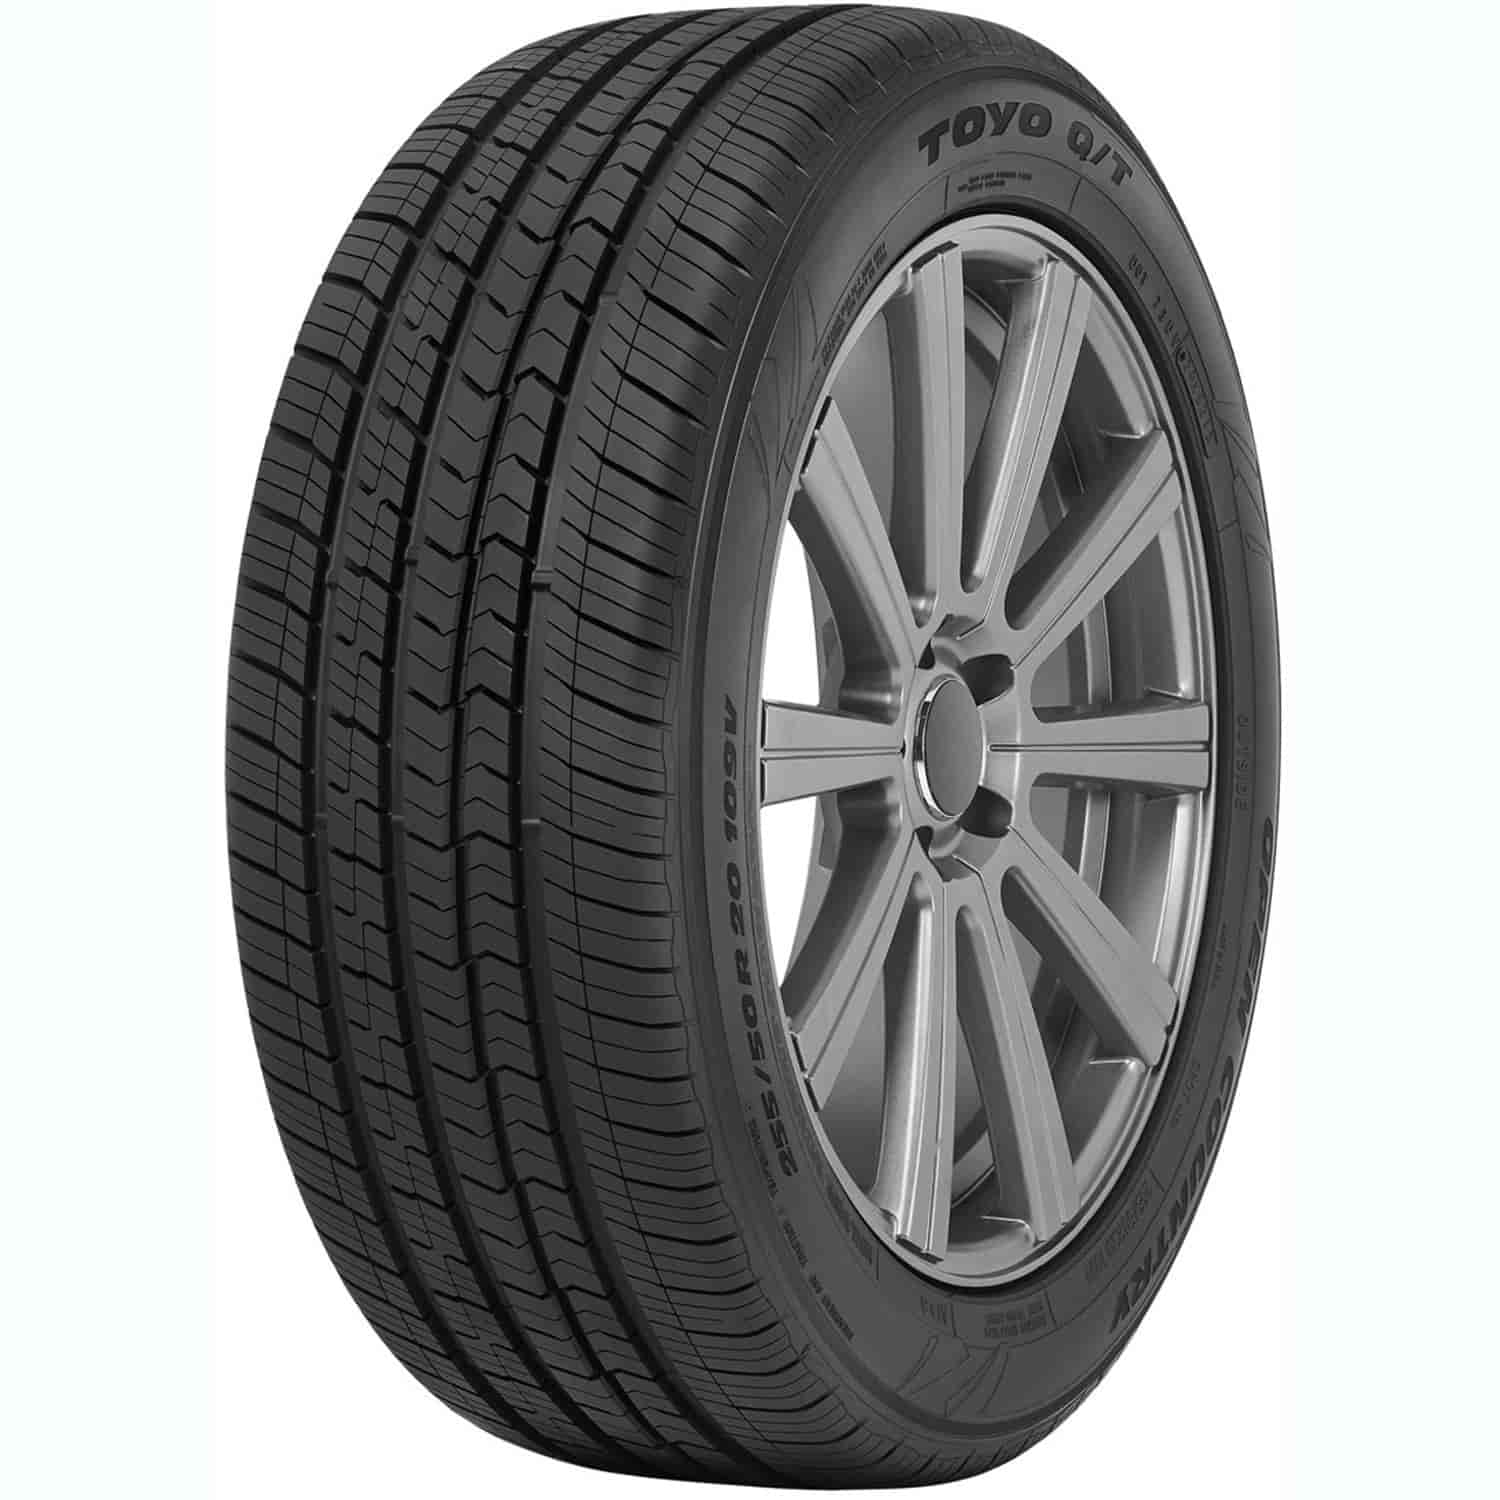 OPEN COUNTRY Q/T 255/50R19 107V XL